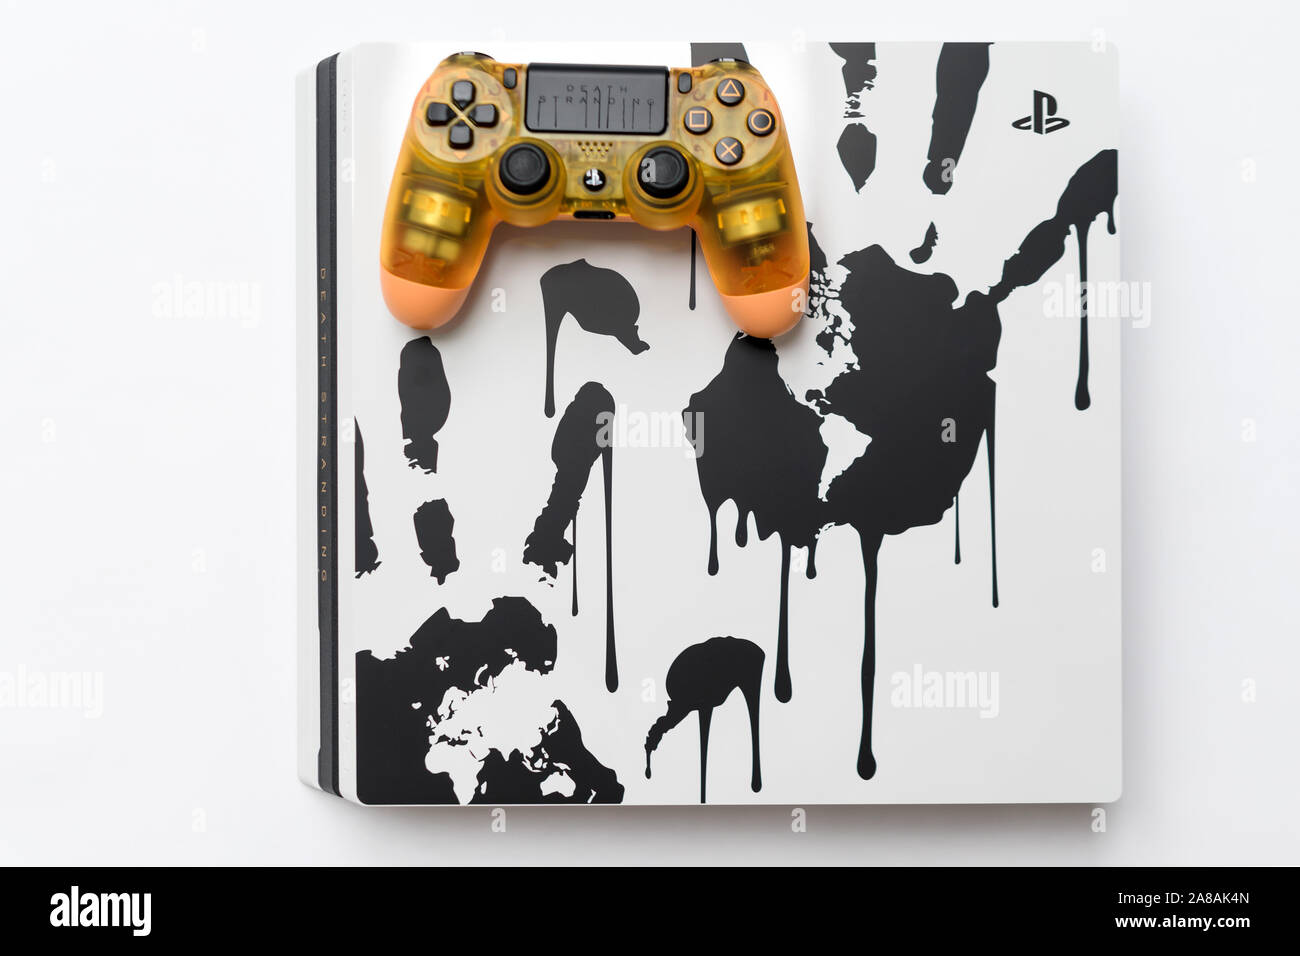 KIEV, UKRAINE - November 07, 2019: Death Stranding Limited Edition PS4  Pro.Sony PlayStation 4 Game Console and Controllers Editorial Photo - Image  of games, game: 163341231